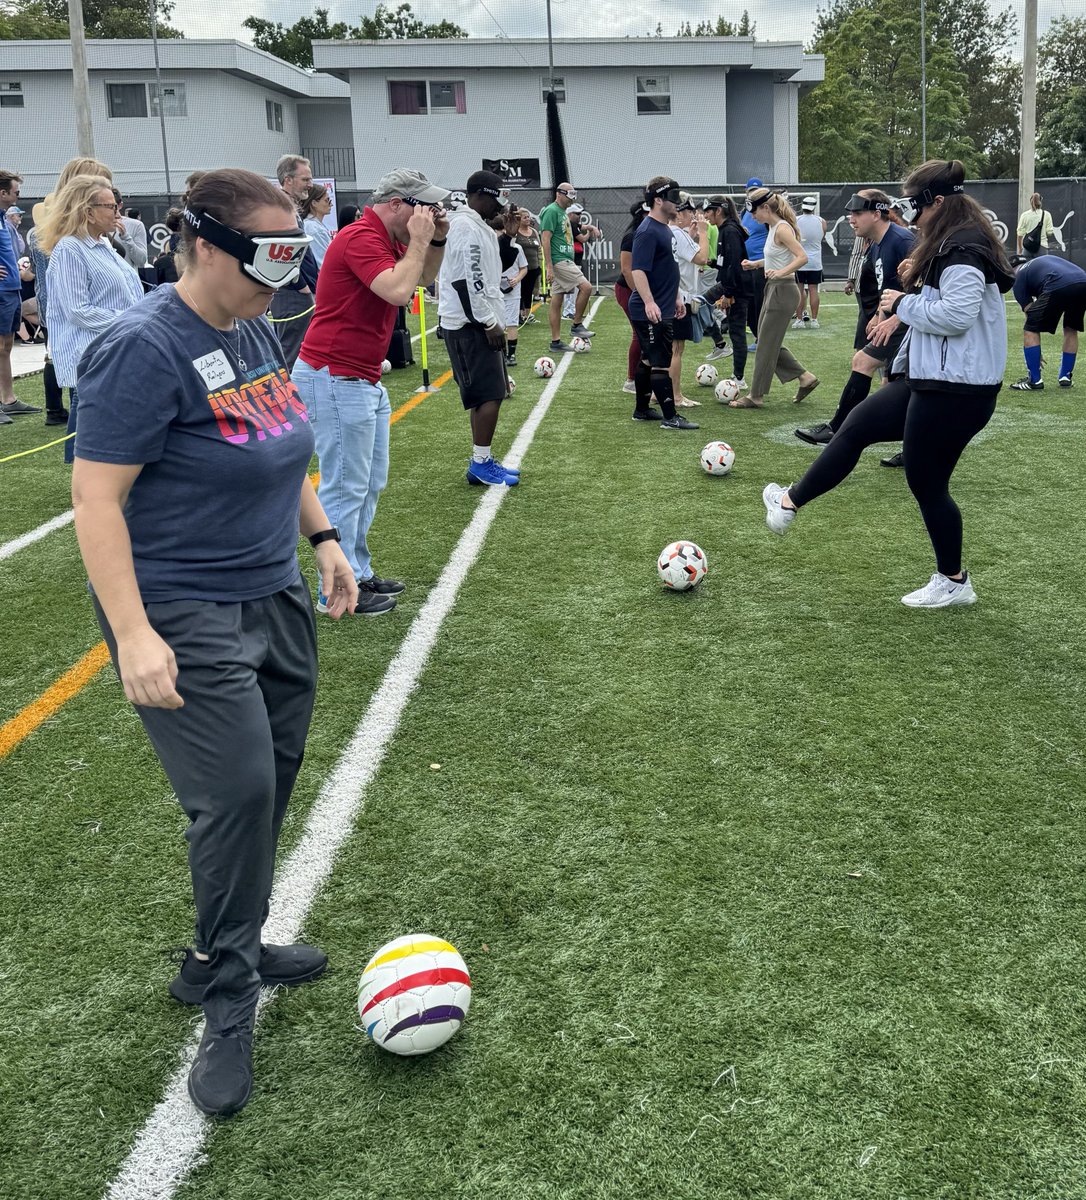 Smiles, teamwork, community, and a shared passion for blind soccer! 🤩⚽️ What an exciting day at the Blind Soccer Kickoff Inclusion Experience in Miami. Thank you to all who made this event a resounding success, it is amazing to witness the growth of blind soccer!